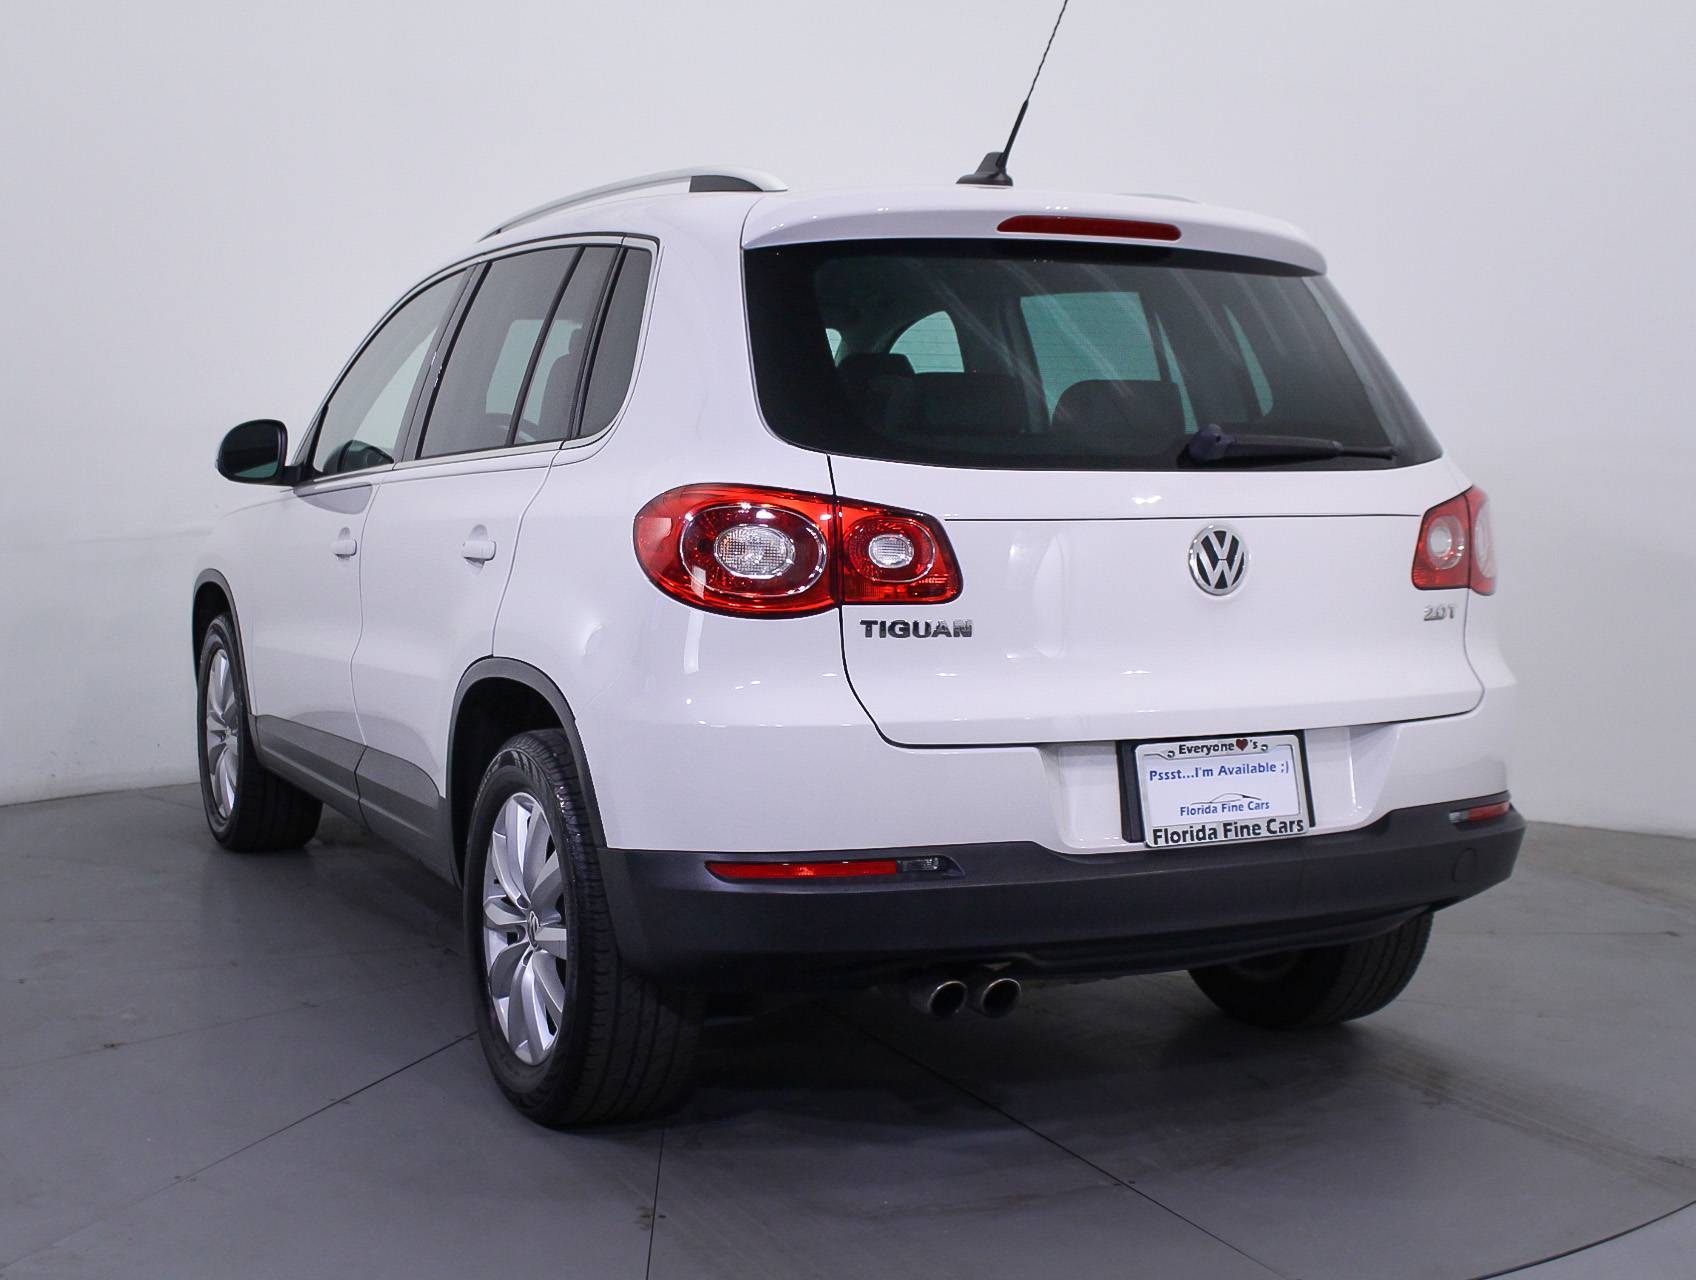 Florida Fine Cars - Used VOLKSWAGEN TIGUAN 2011 HOLLYWOOD S